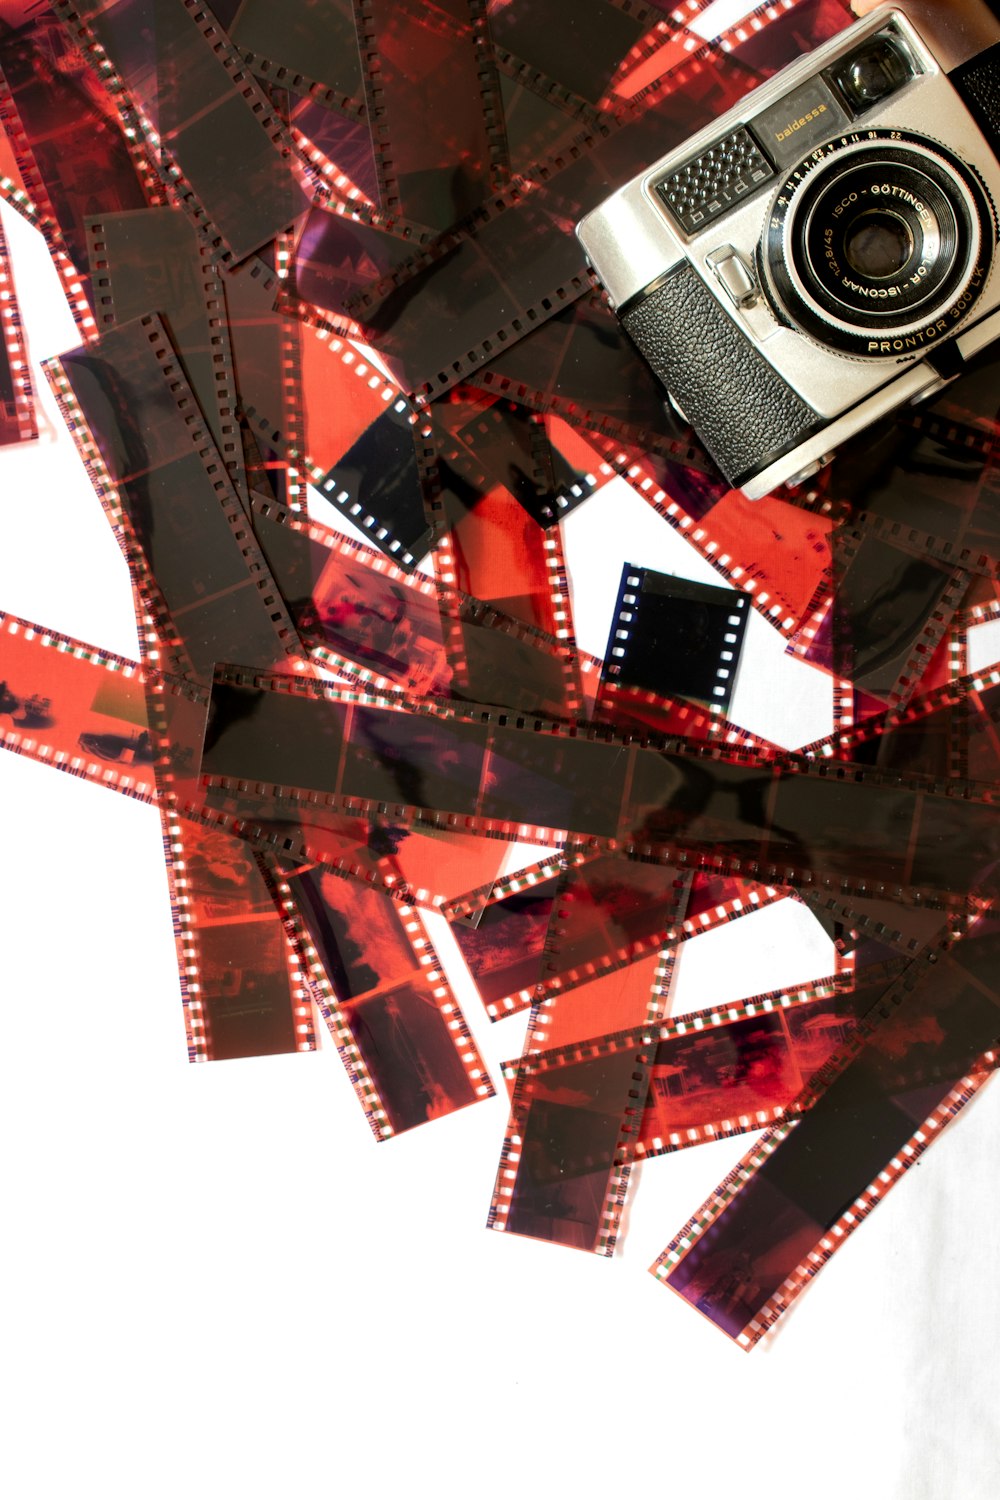 a film strip with a camera on top of it